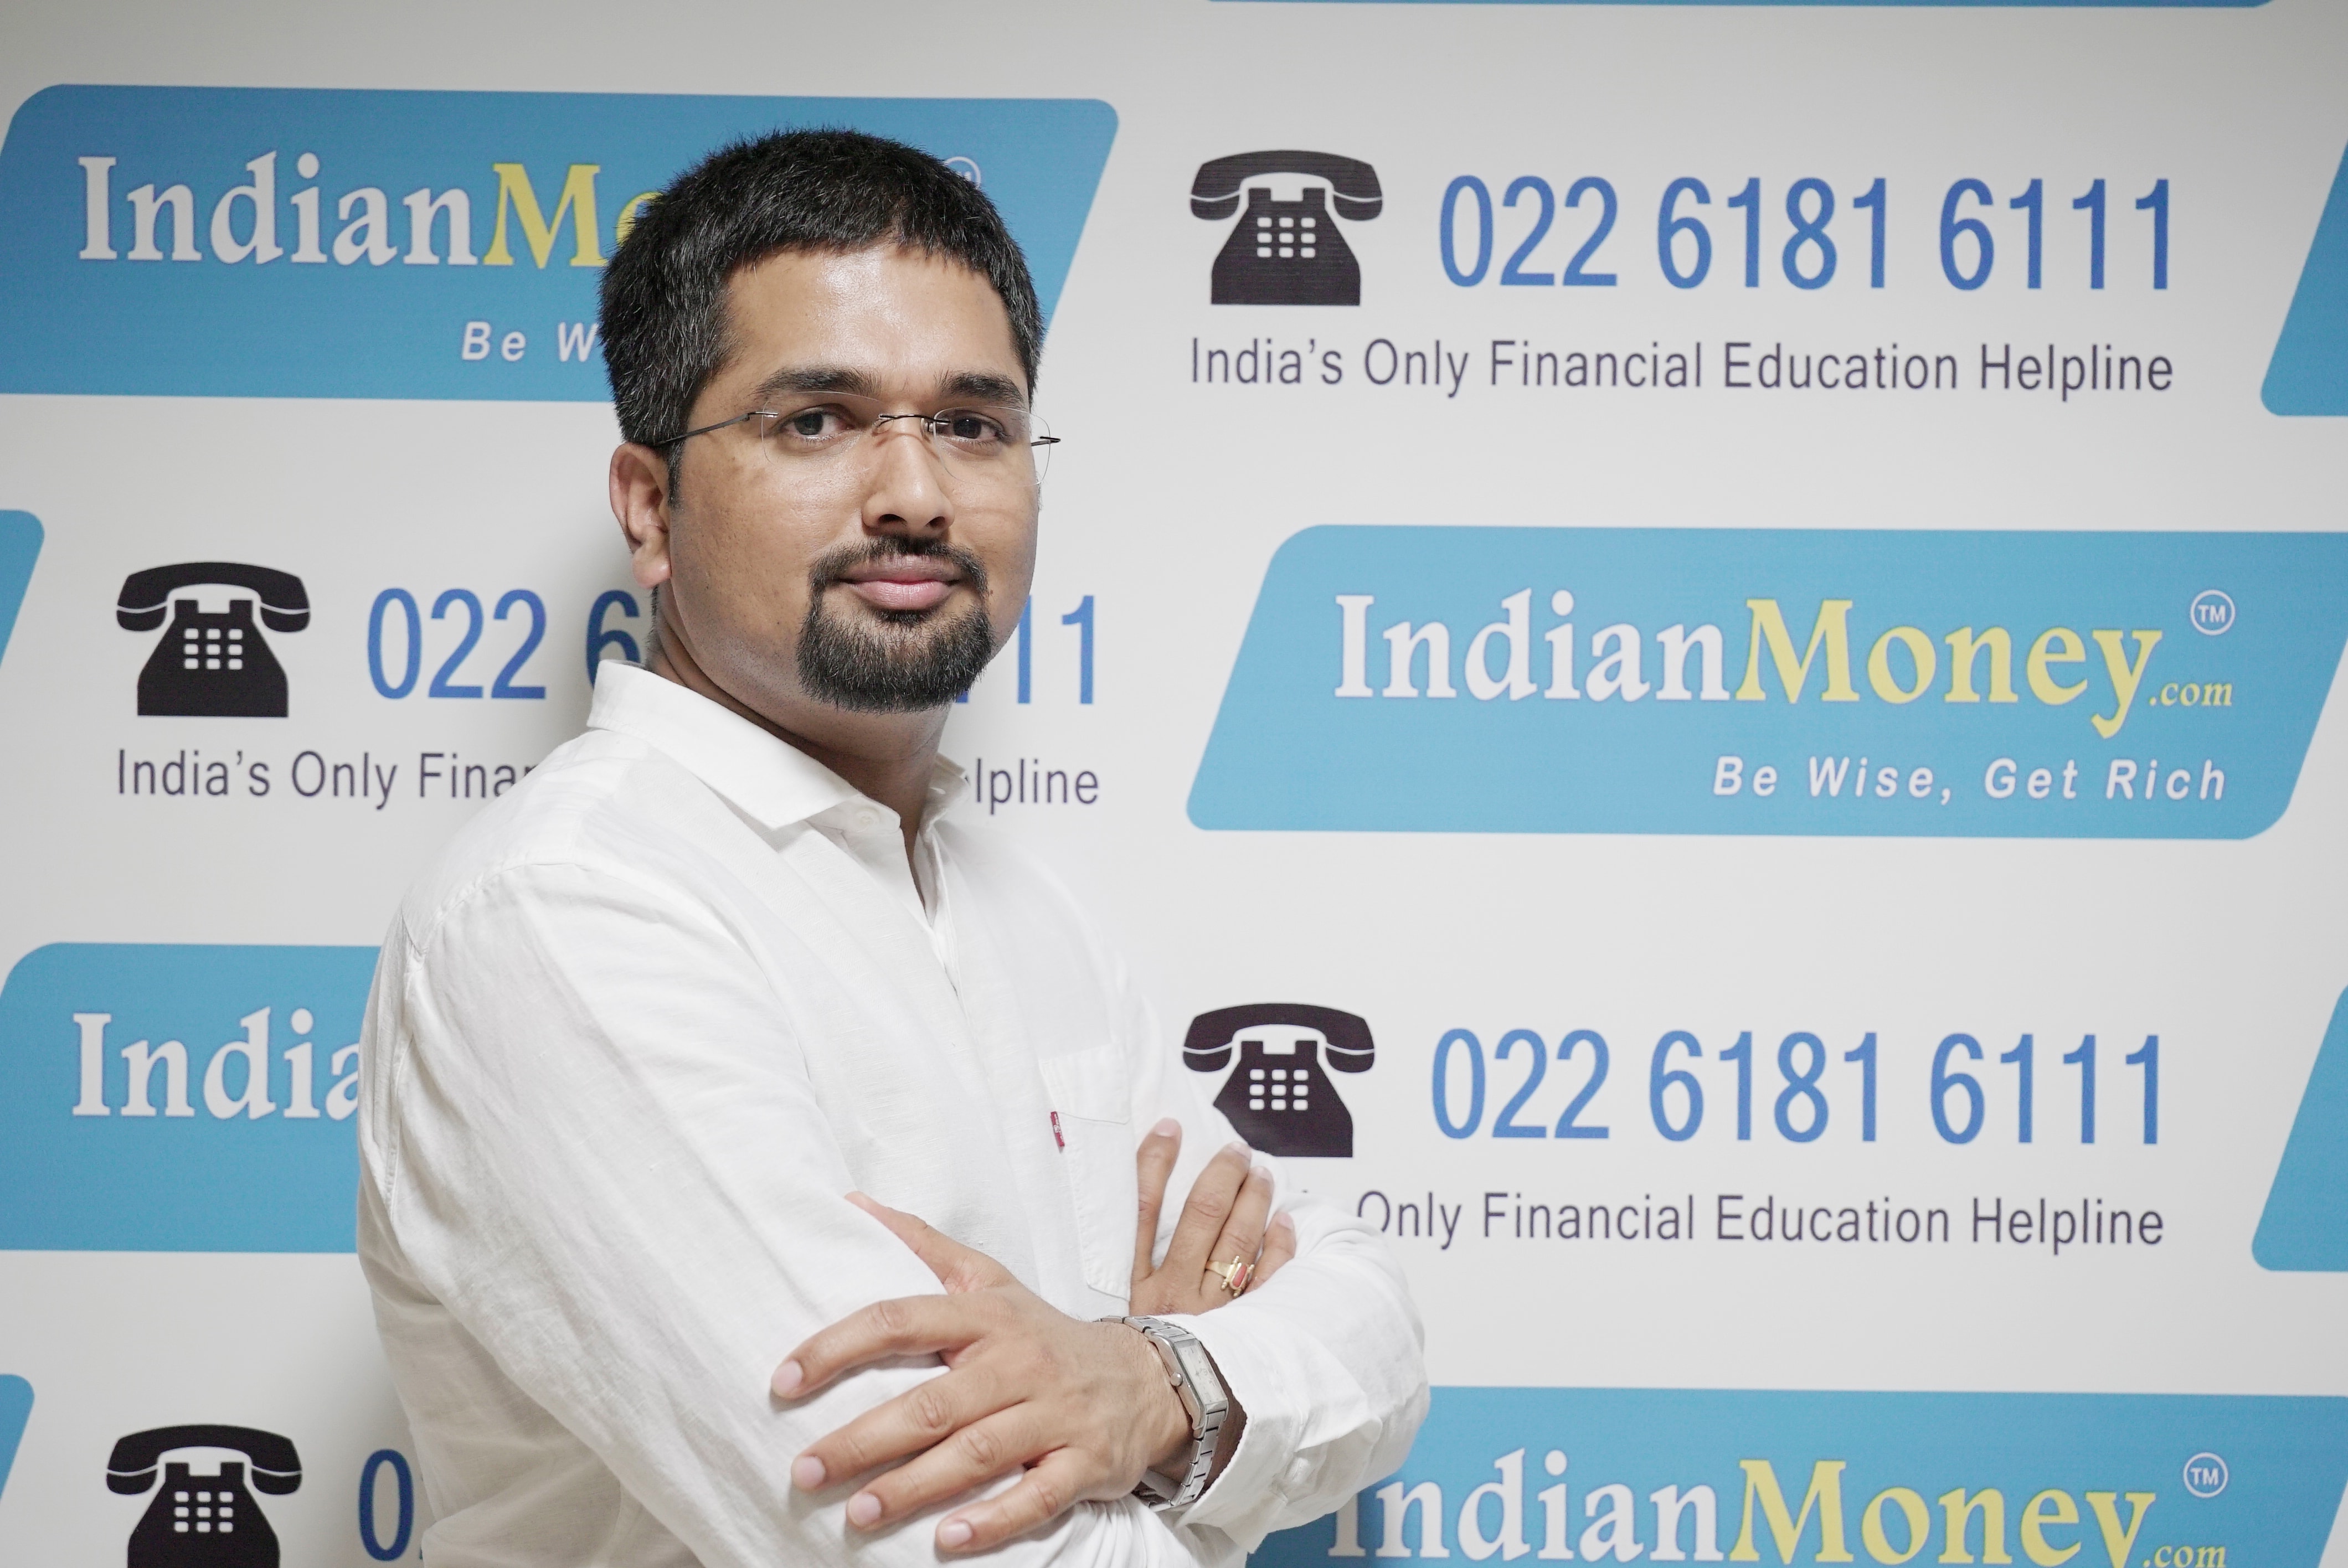 C.S.Sudheer, Founder of IndianMoney Group